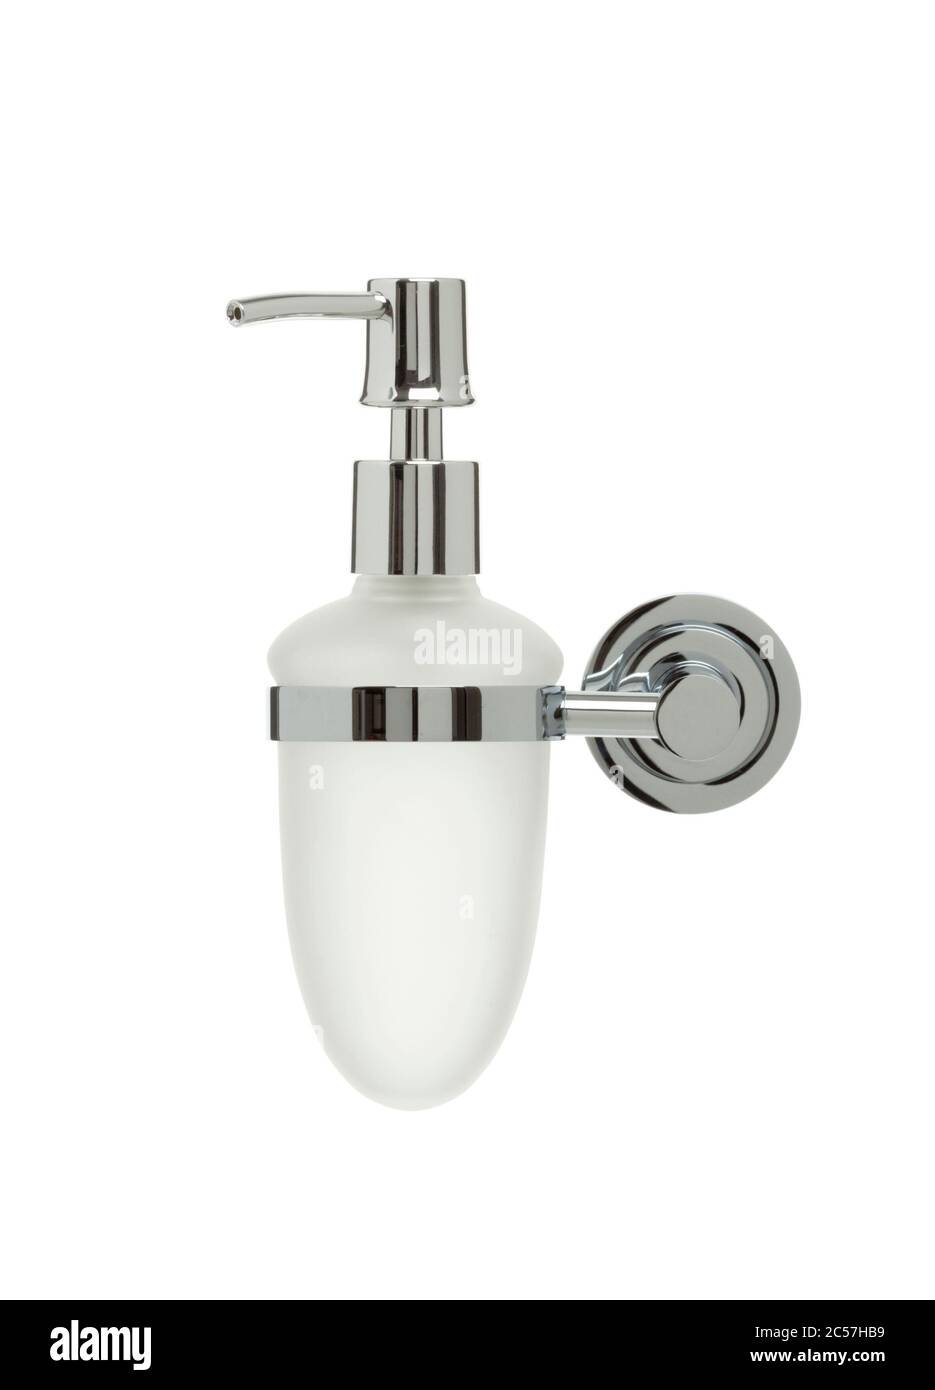 https://c8.alamy.com/comp/2C57HB9/frosted-glass-liquid-soap-dispenser-in-chrome-plated-holder-isolated-on-white-background-2C57HB9.jpg